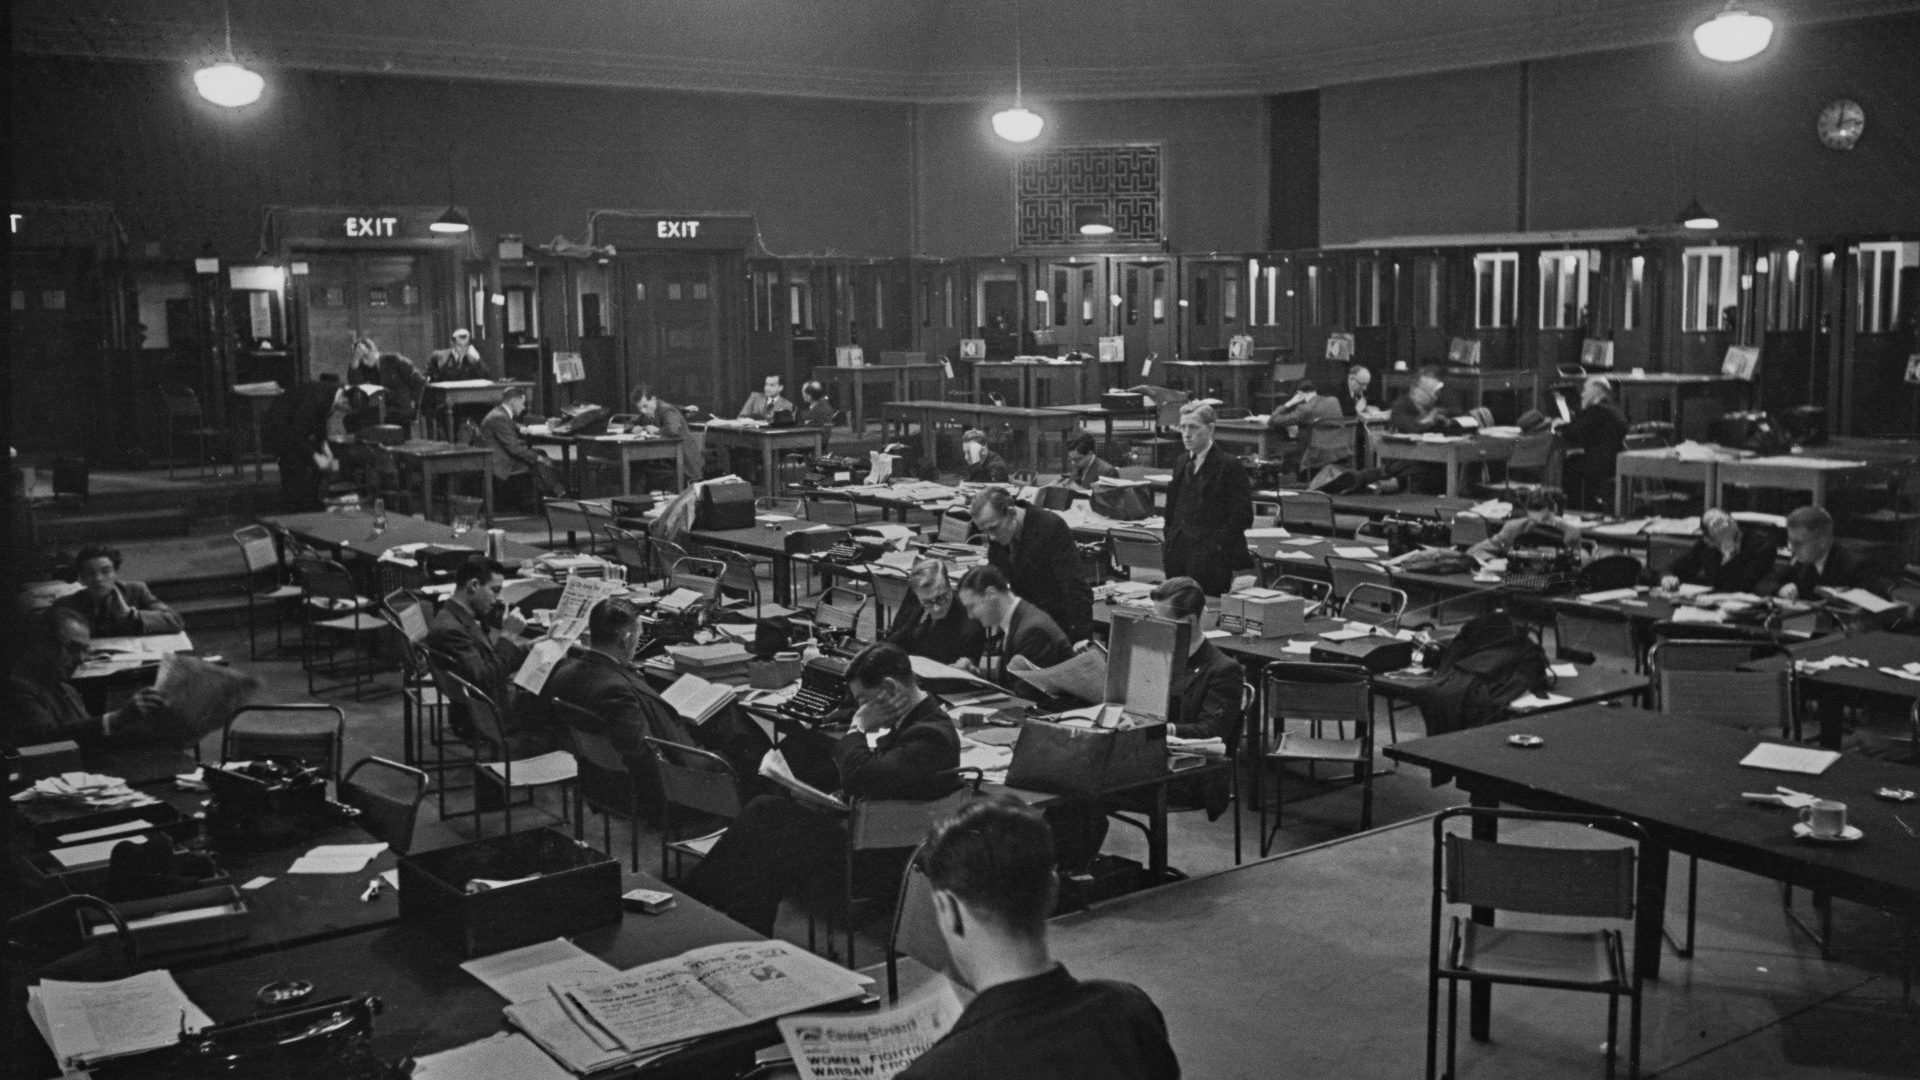 Staff at their desks in the offices of the Ministry of Information in Senate House, London, 1940. Photo: Fox Photos/Hulton Archive/Getty 